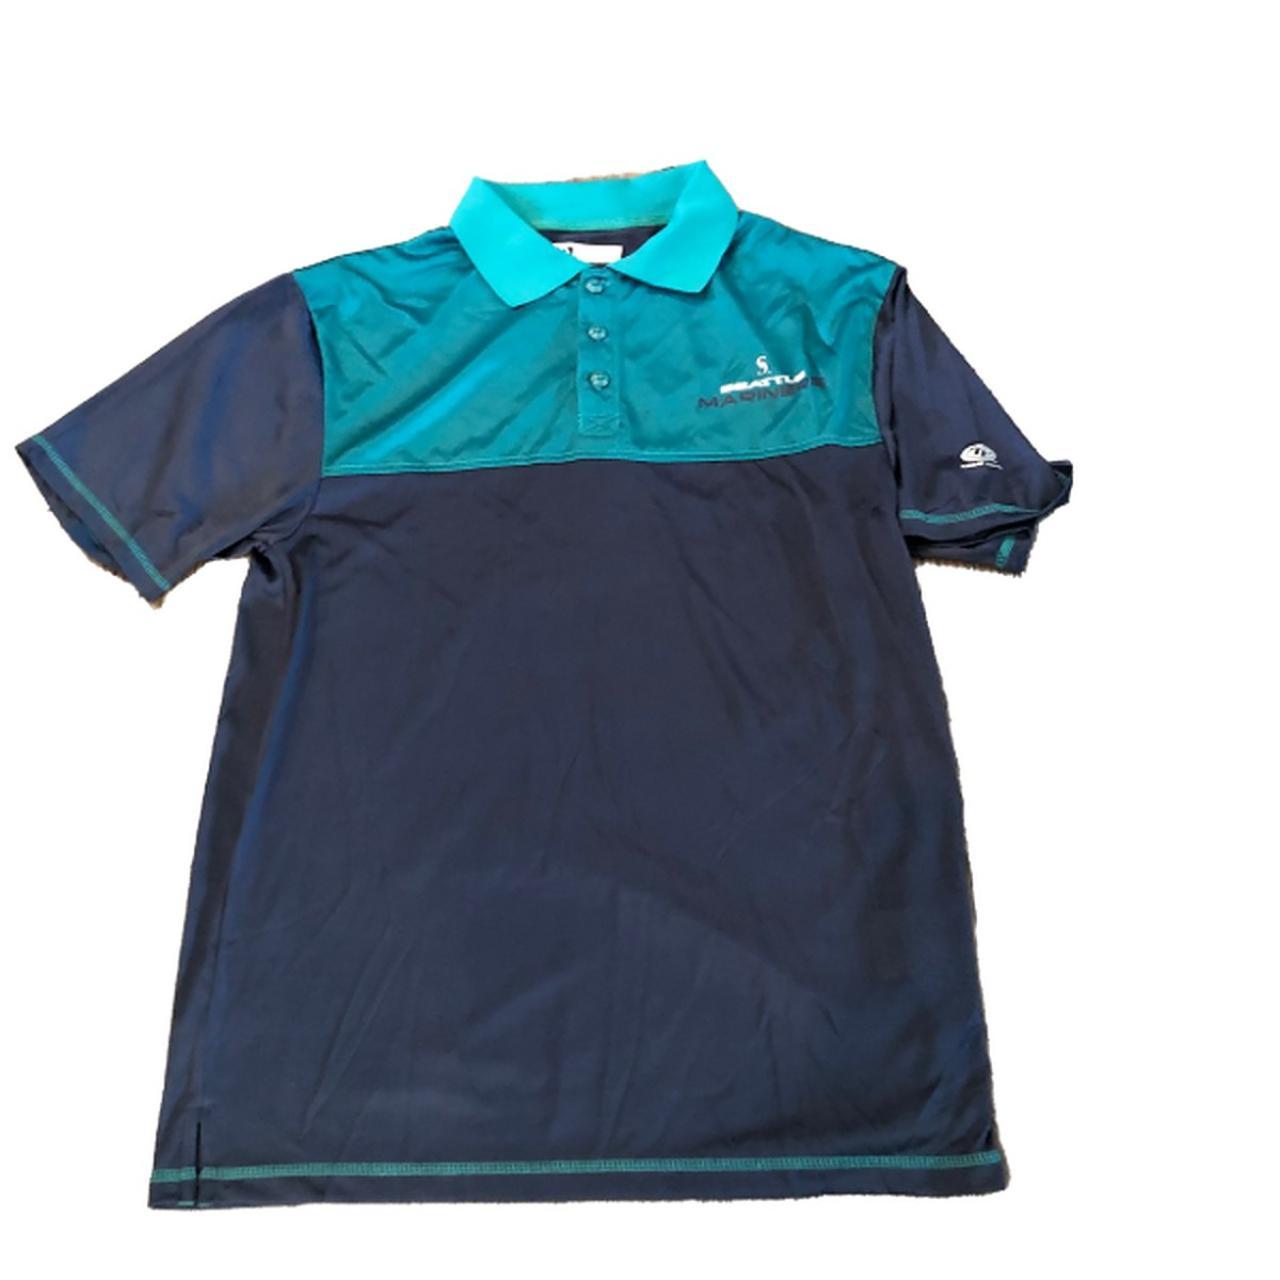 Men's Navy and Green Polo-shirts